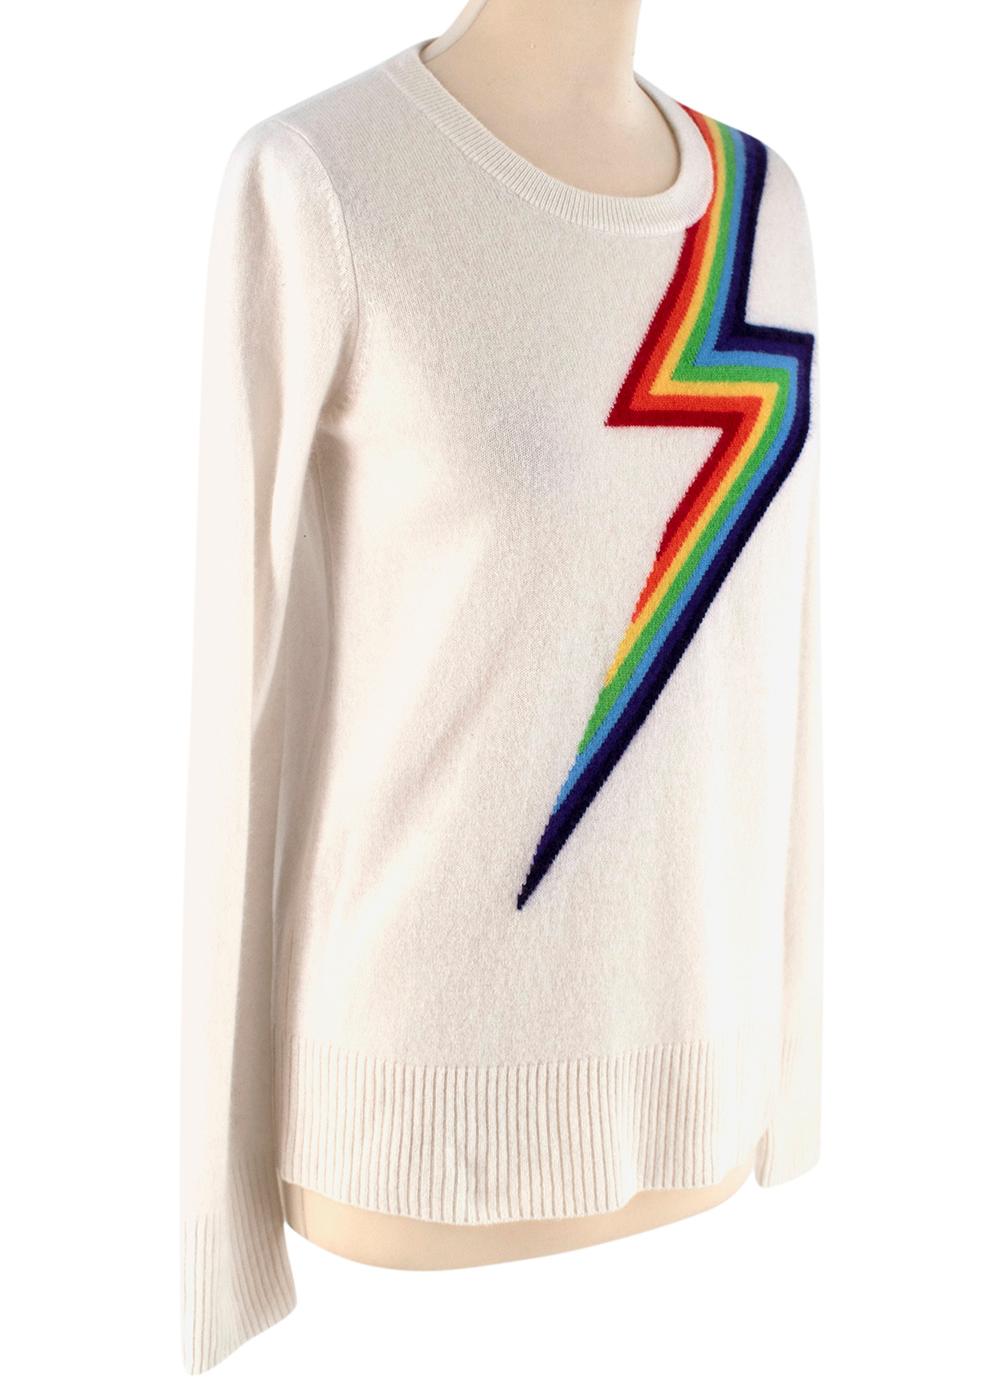 Madeleine Thompson Ivory Rainbow Pattern Cashmere Sweater

White multicolored cashmere rainbow pattern sweater from Madeleine Thompson featuring a crew neck and long sleeves.

- Luxurious super soft cashmere texture 
- Rainbow pattern resembling a